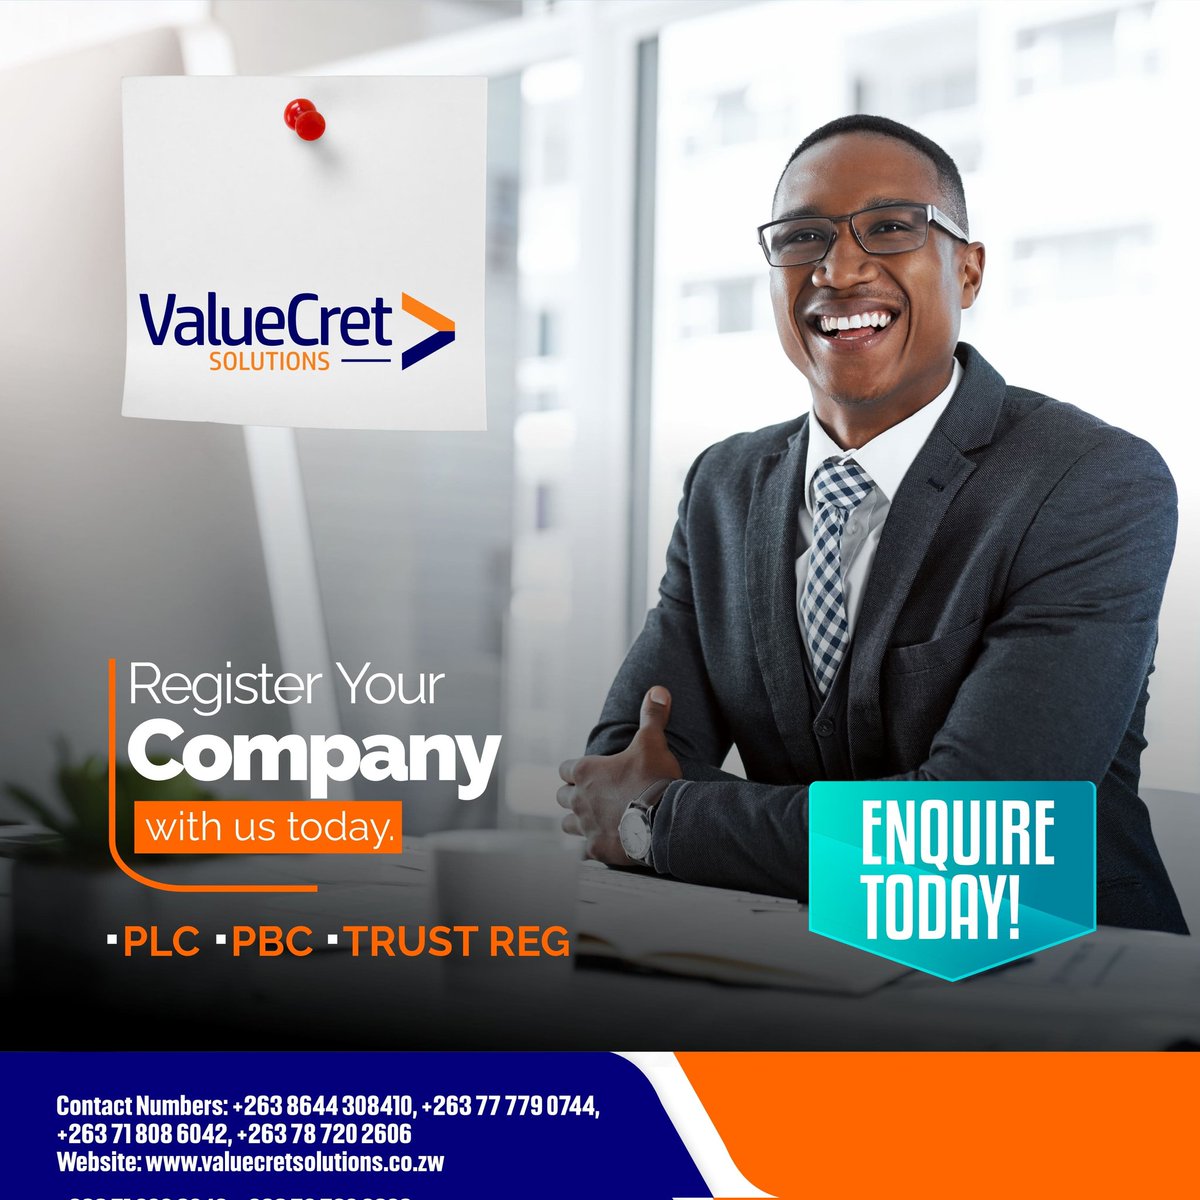 Why don't you formalize your business? Why are you hesitating? Why don't you talk to the experts and get your company registered in 3 days tokupai mapapers enyu.

#MoreValue_MoreSolutions
#CompanyRegistration
#TaxClearance
#BusinessConsultancy